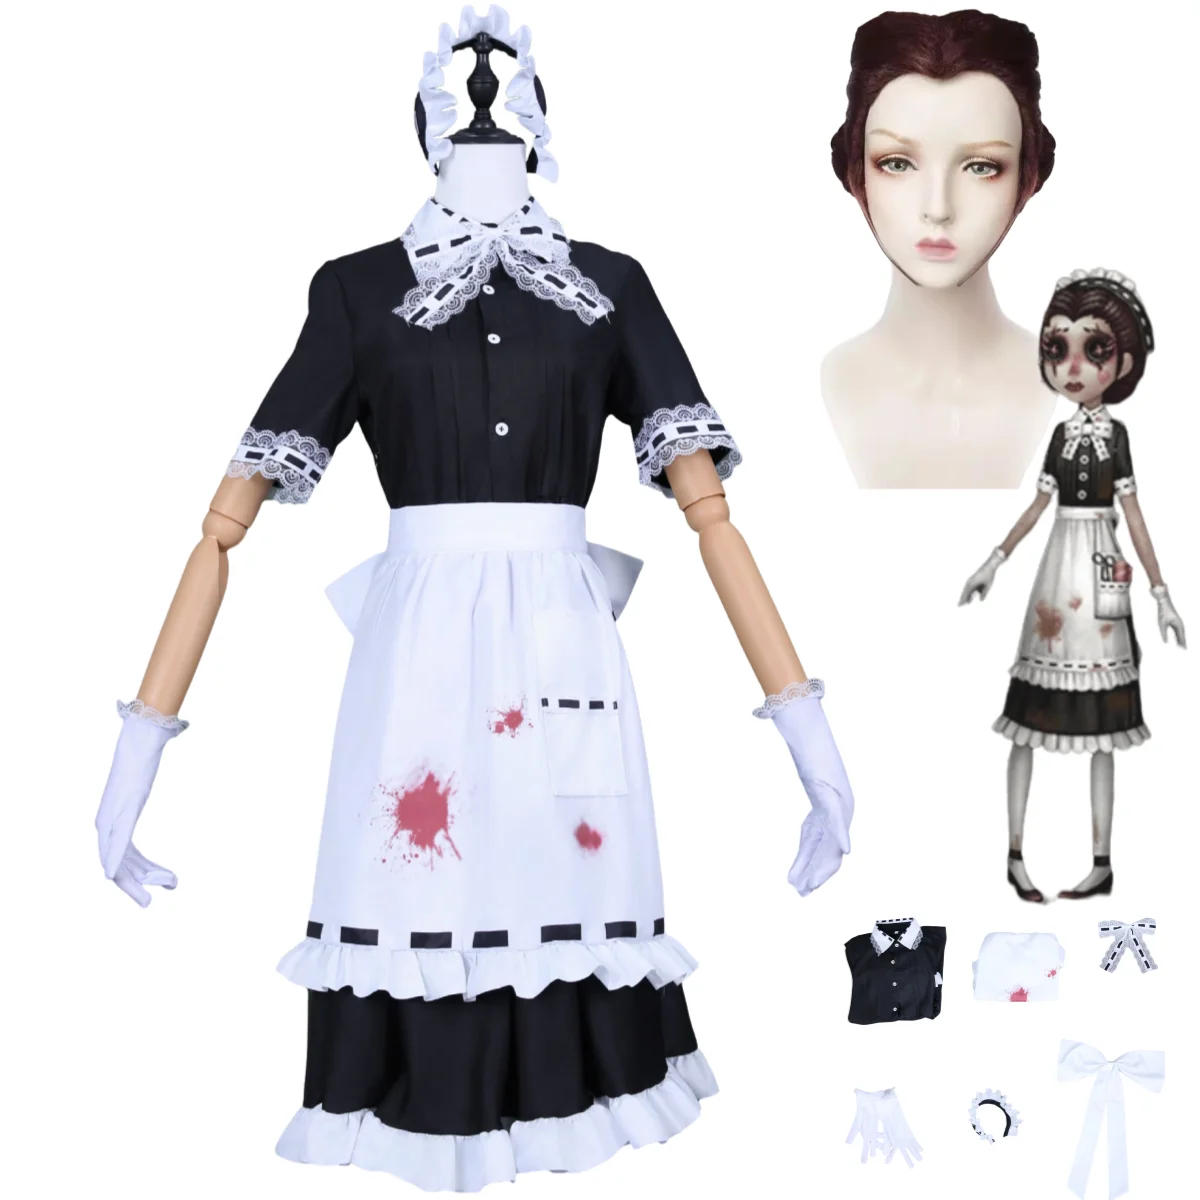 

Anime Game Identity Ⅴ Emily Dyer Cosplay Costume Skin Banquet Maid Doctor Black White Dress Apron Woman Kawaii Halloween Suit